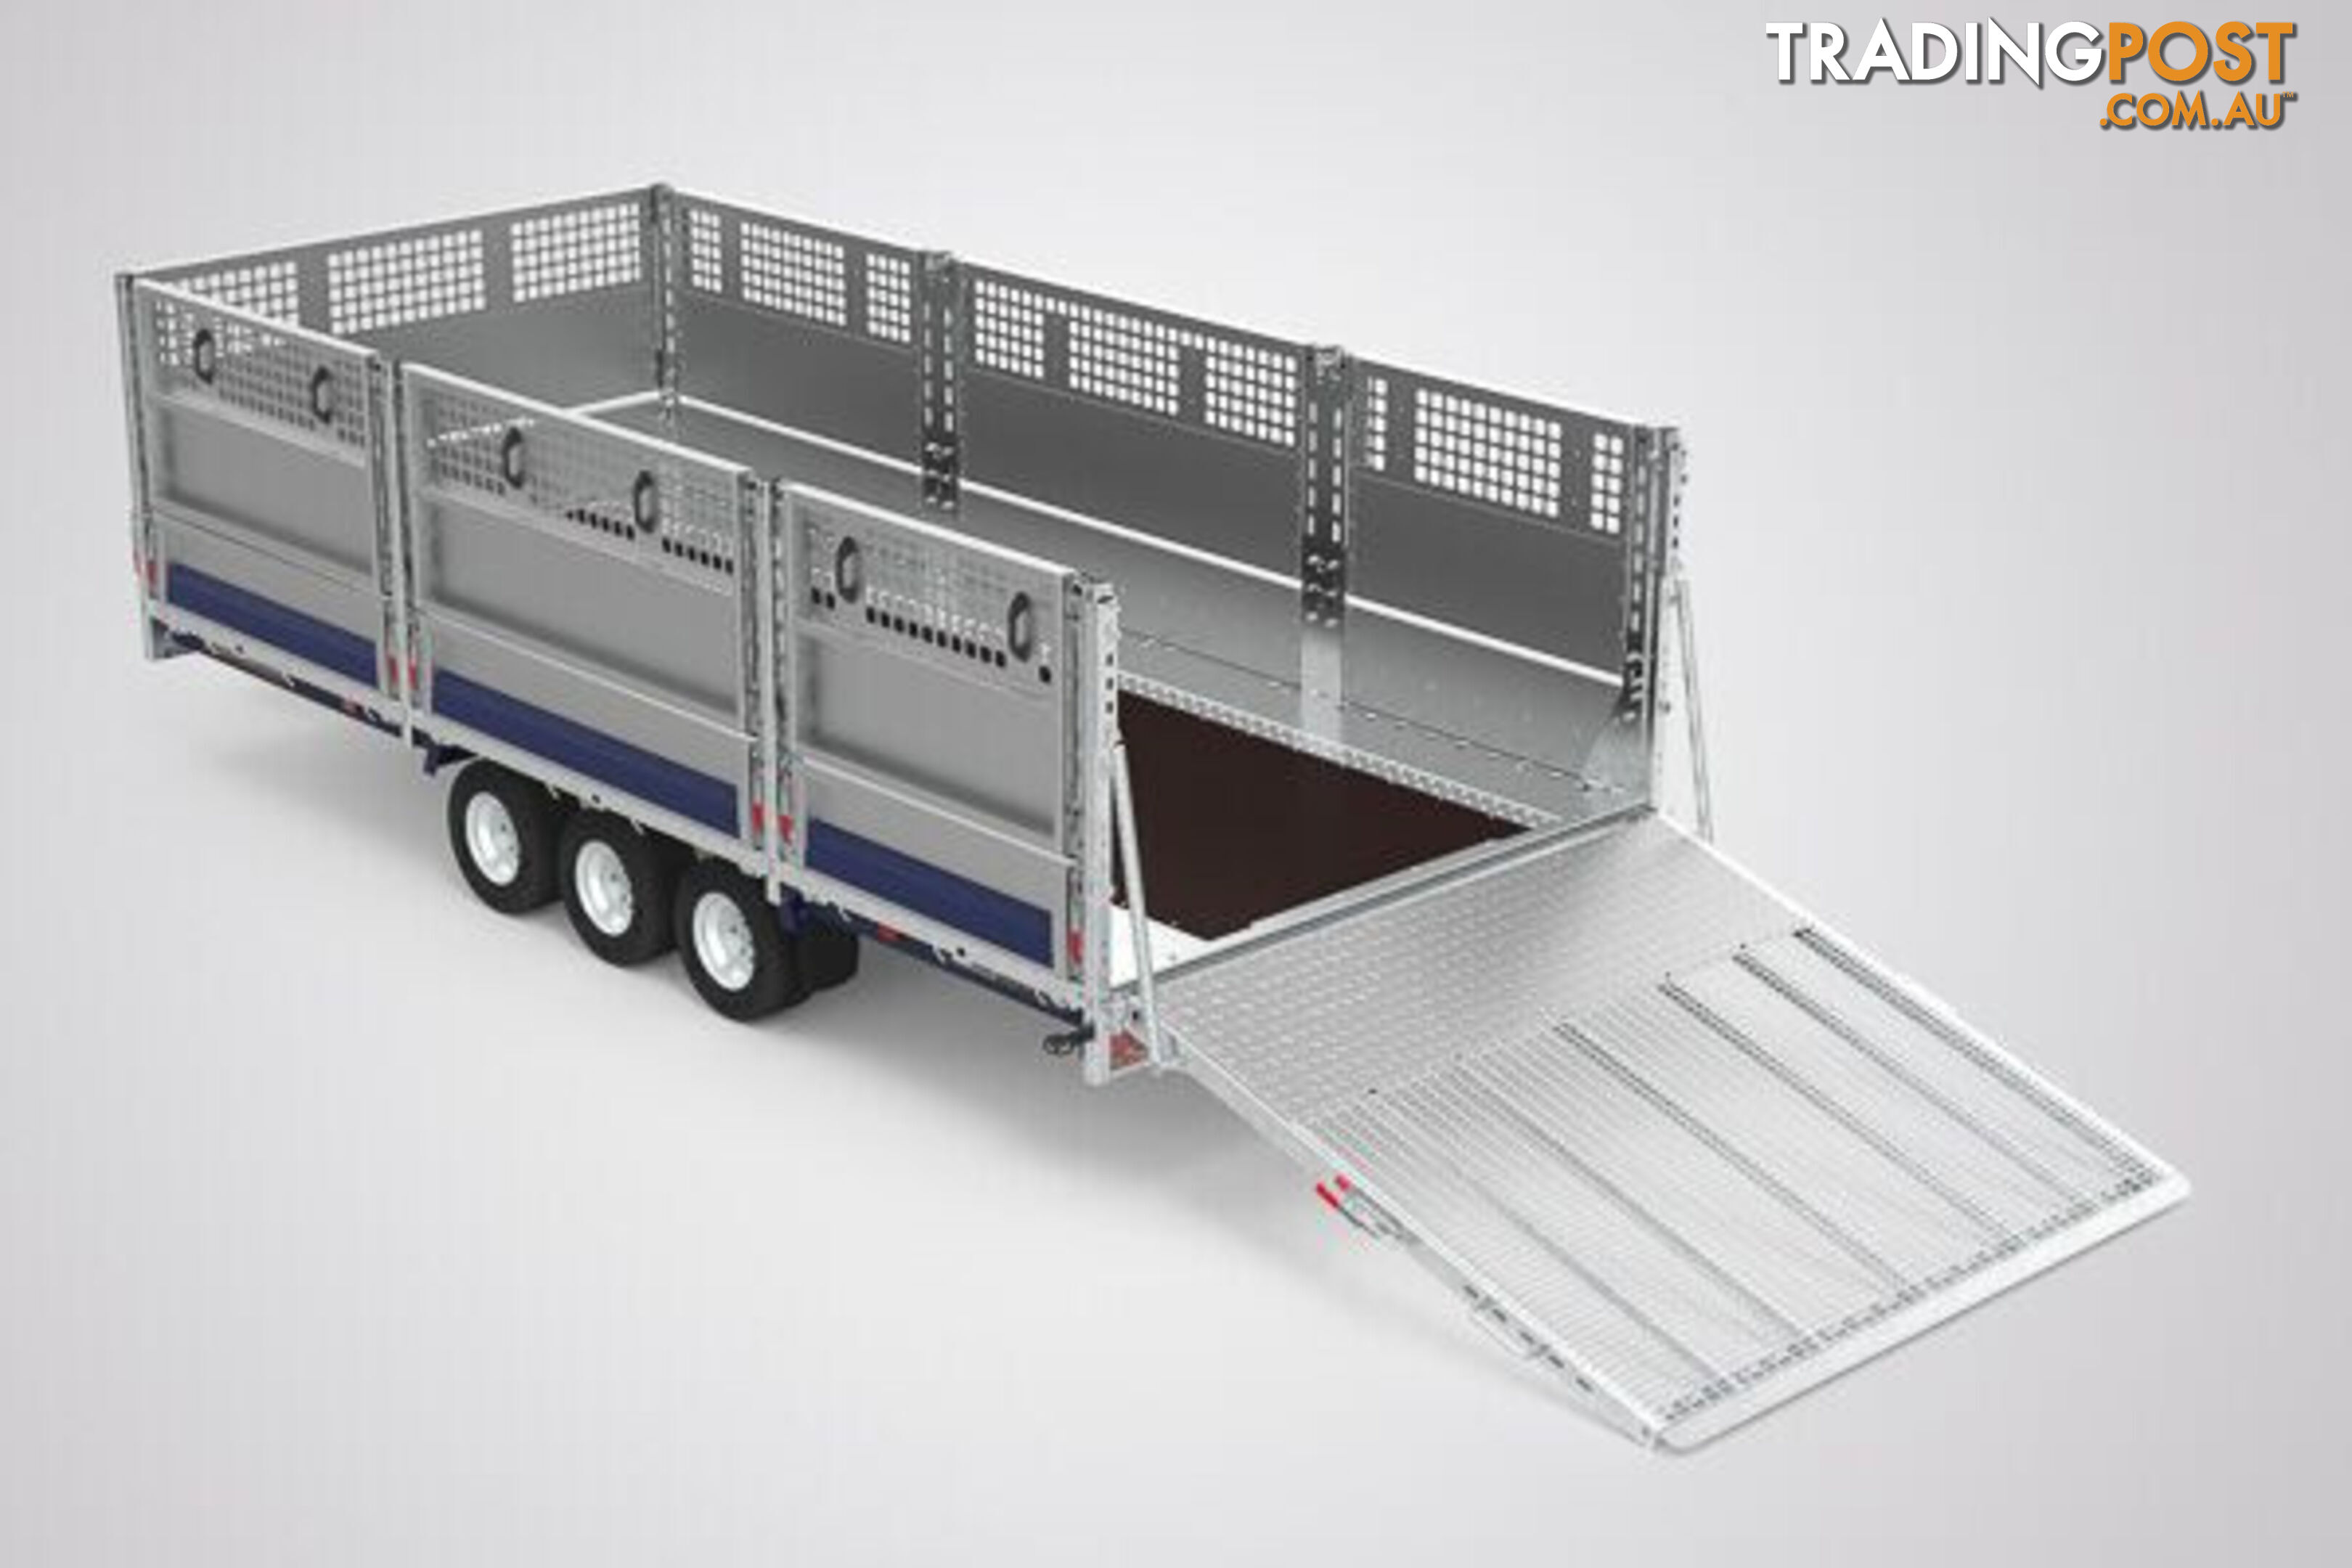 Brian James Tag Tag/Plant(with ramps) Trailer